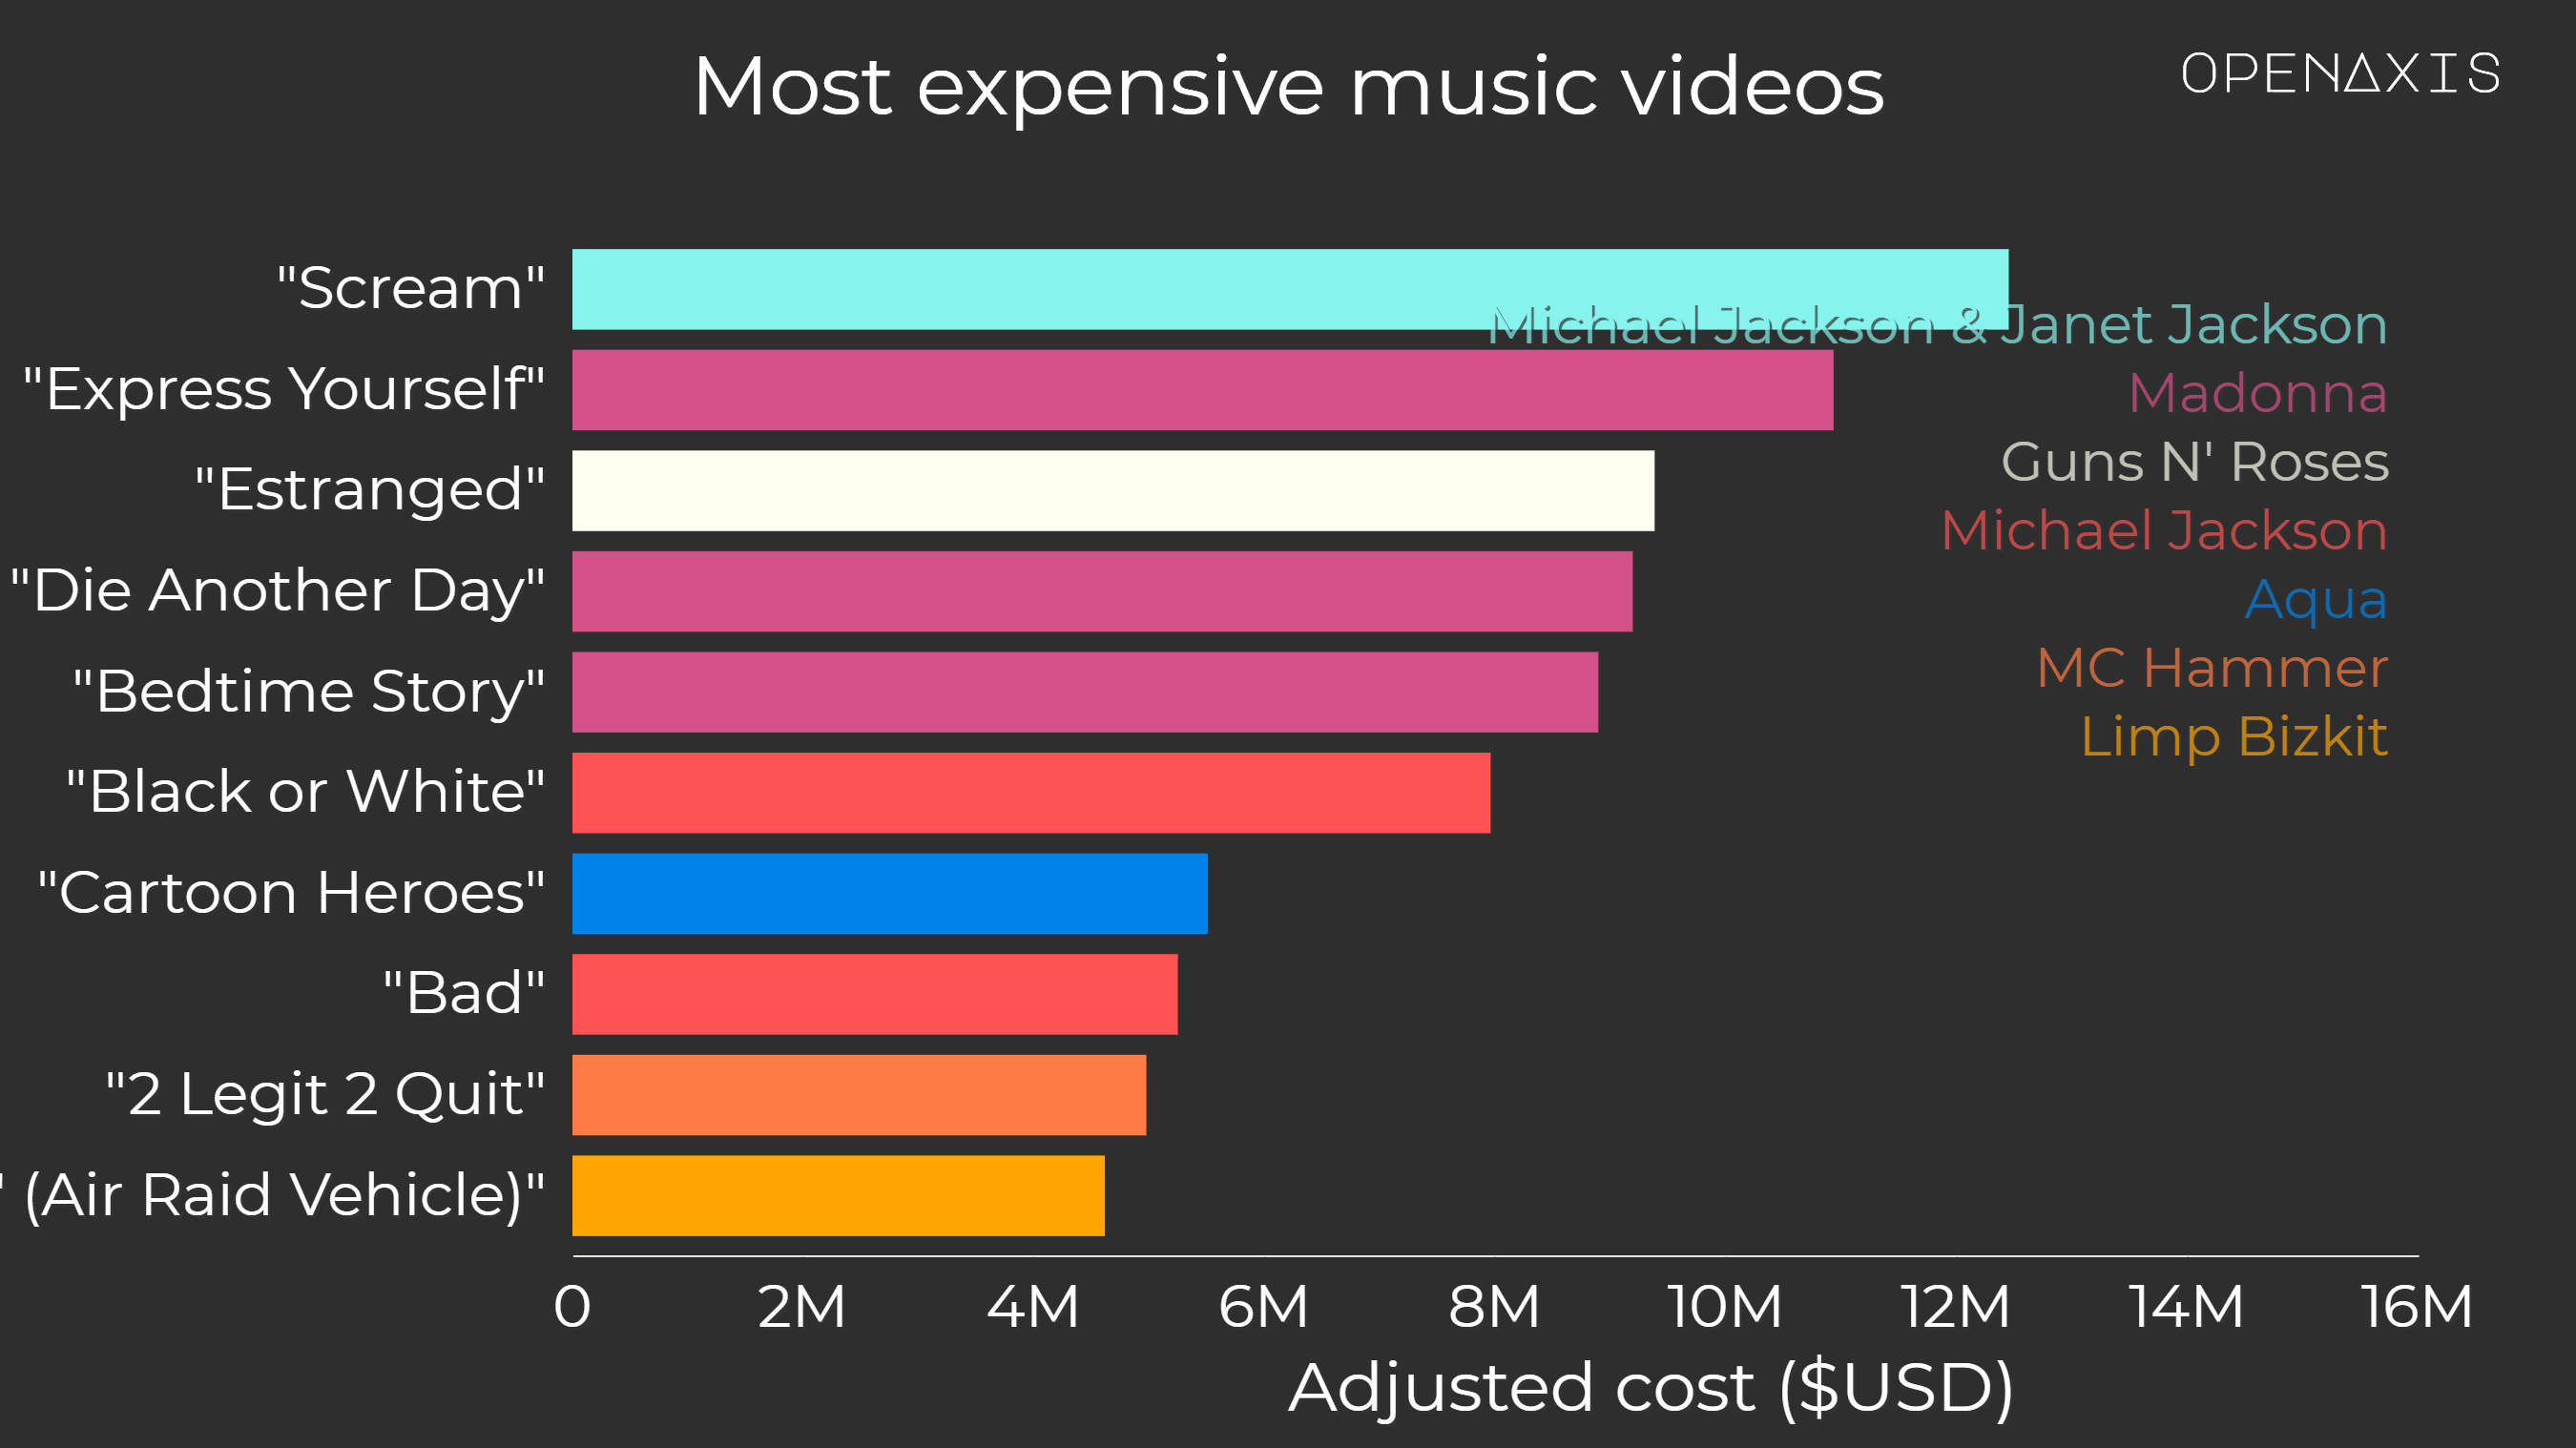 "Most expensive music videos"